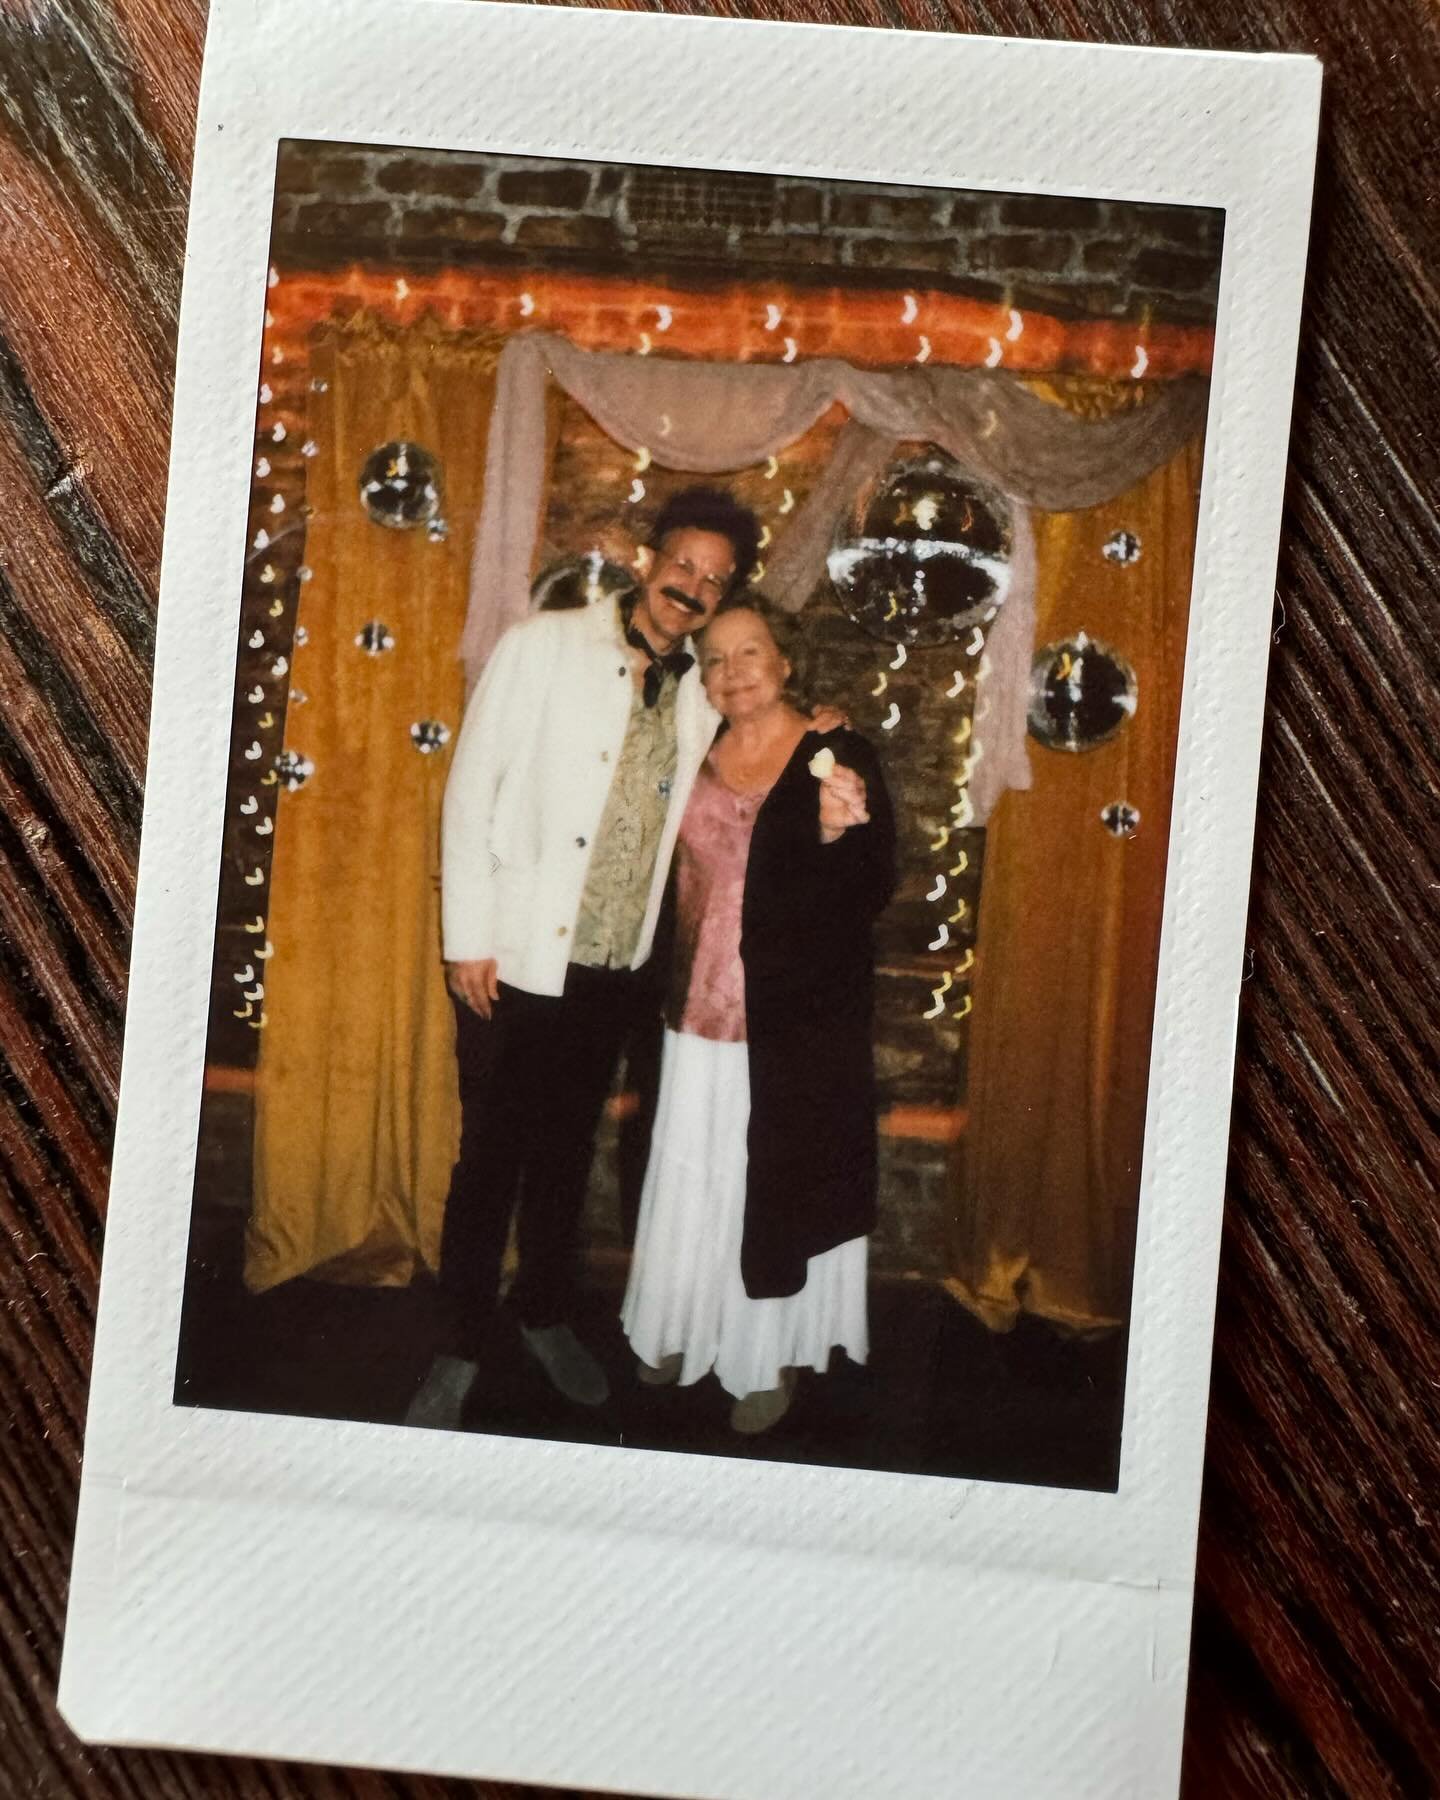 Tacos, dancing, disco balls, great company, and an open bar. What better way to celebrate a birthday! We had a blast hosting this dynamic mother &amp; son duo as they celebrated milestone birthdays together! 🥳 🎉 

They danced the night away; &amp; 